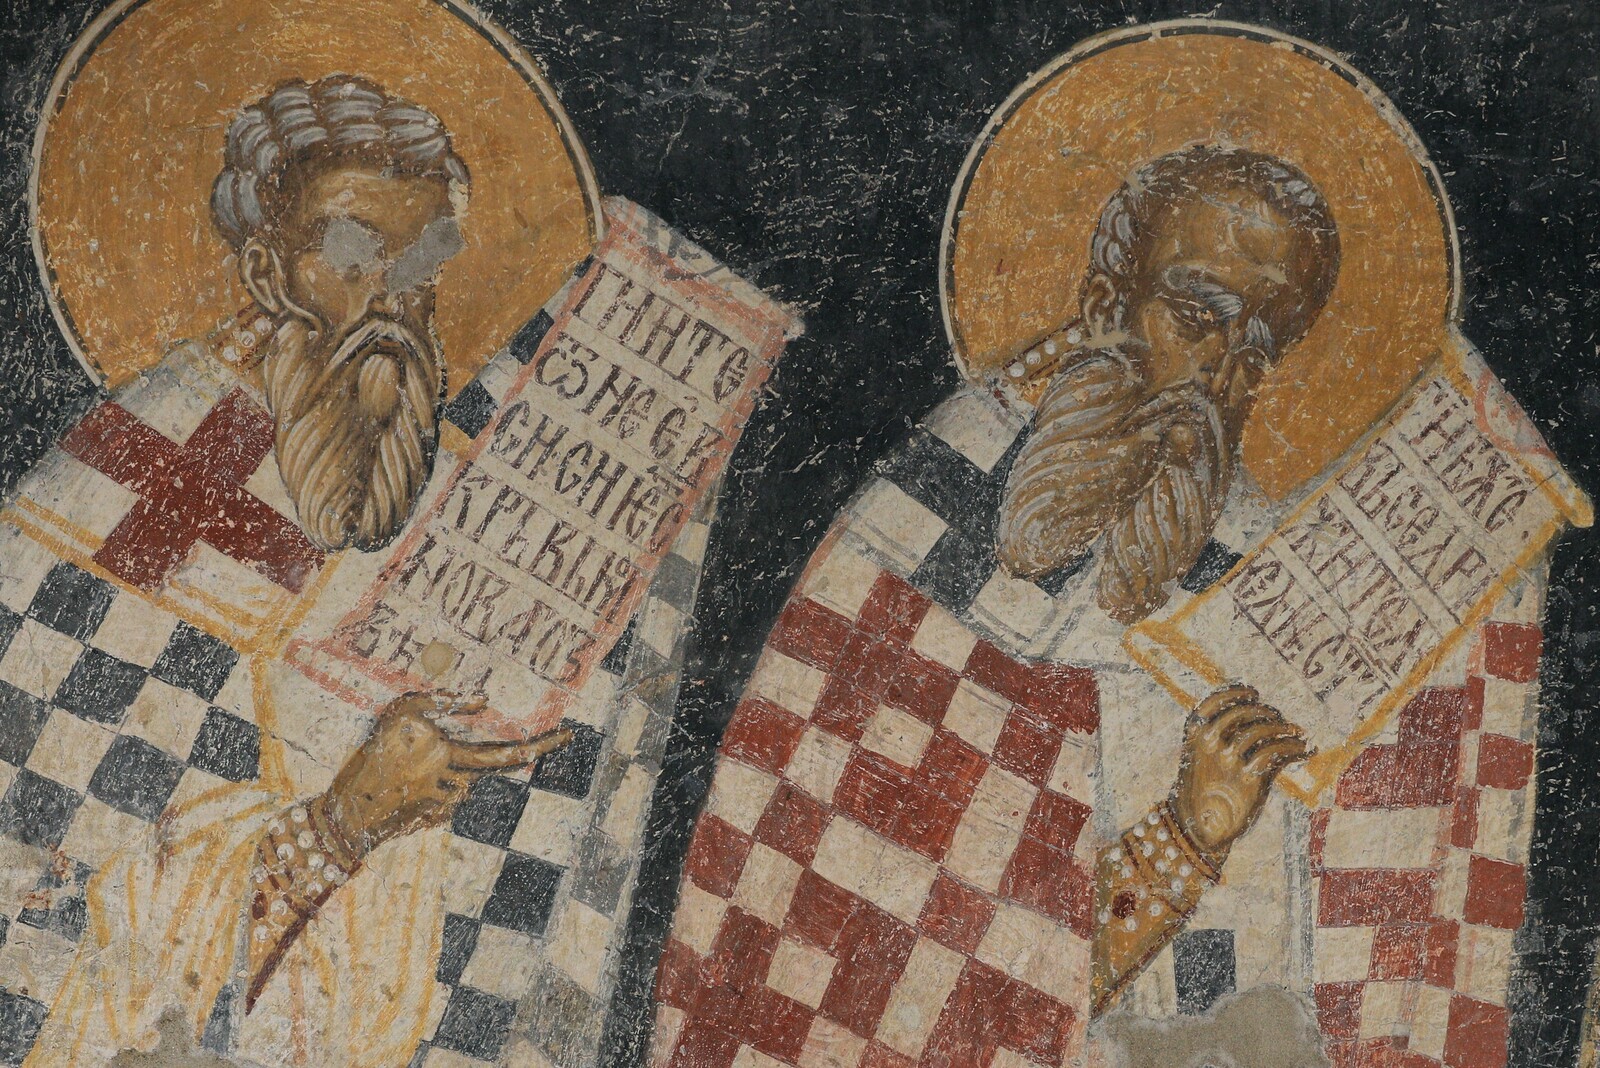 Officiating Church Fathers, detail